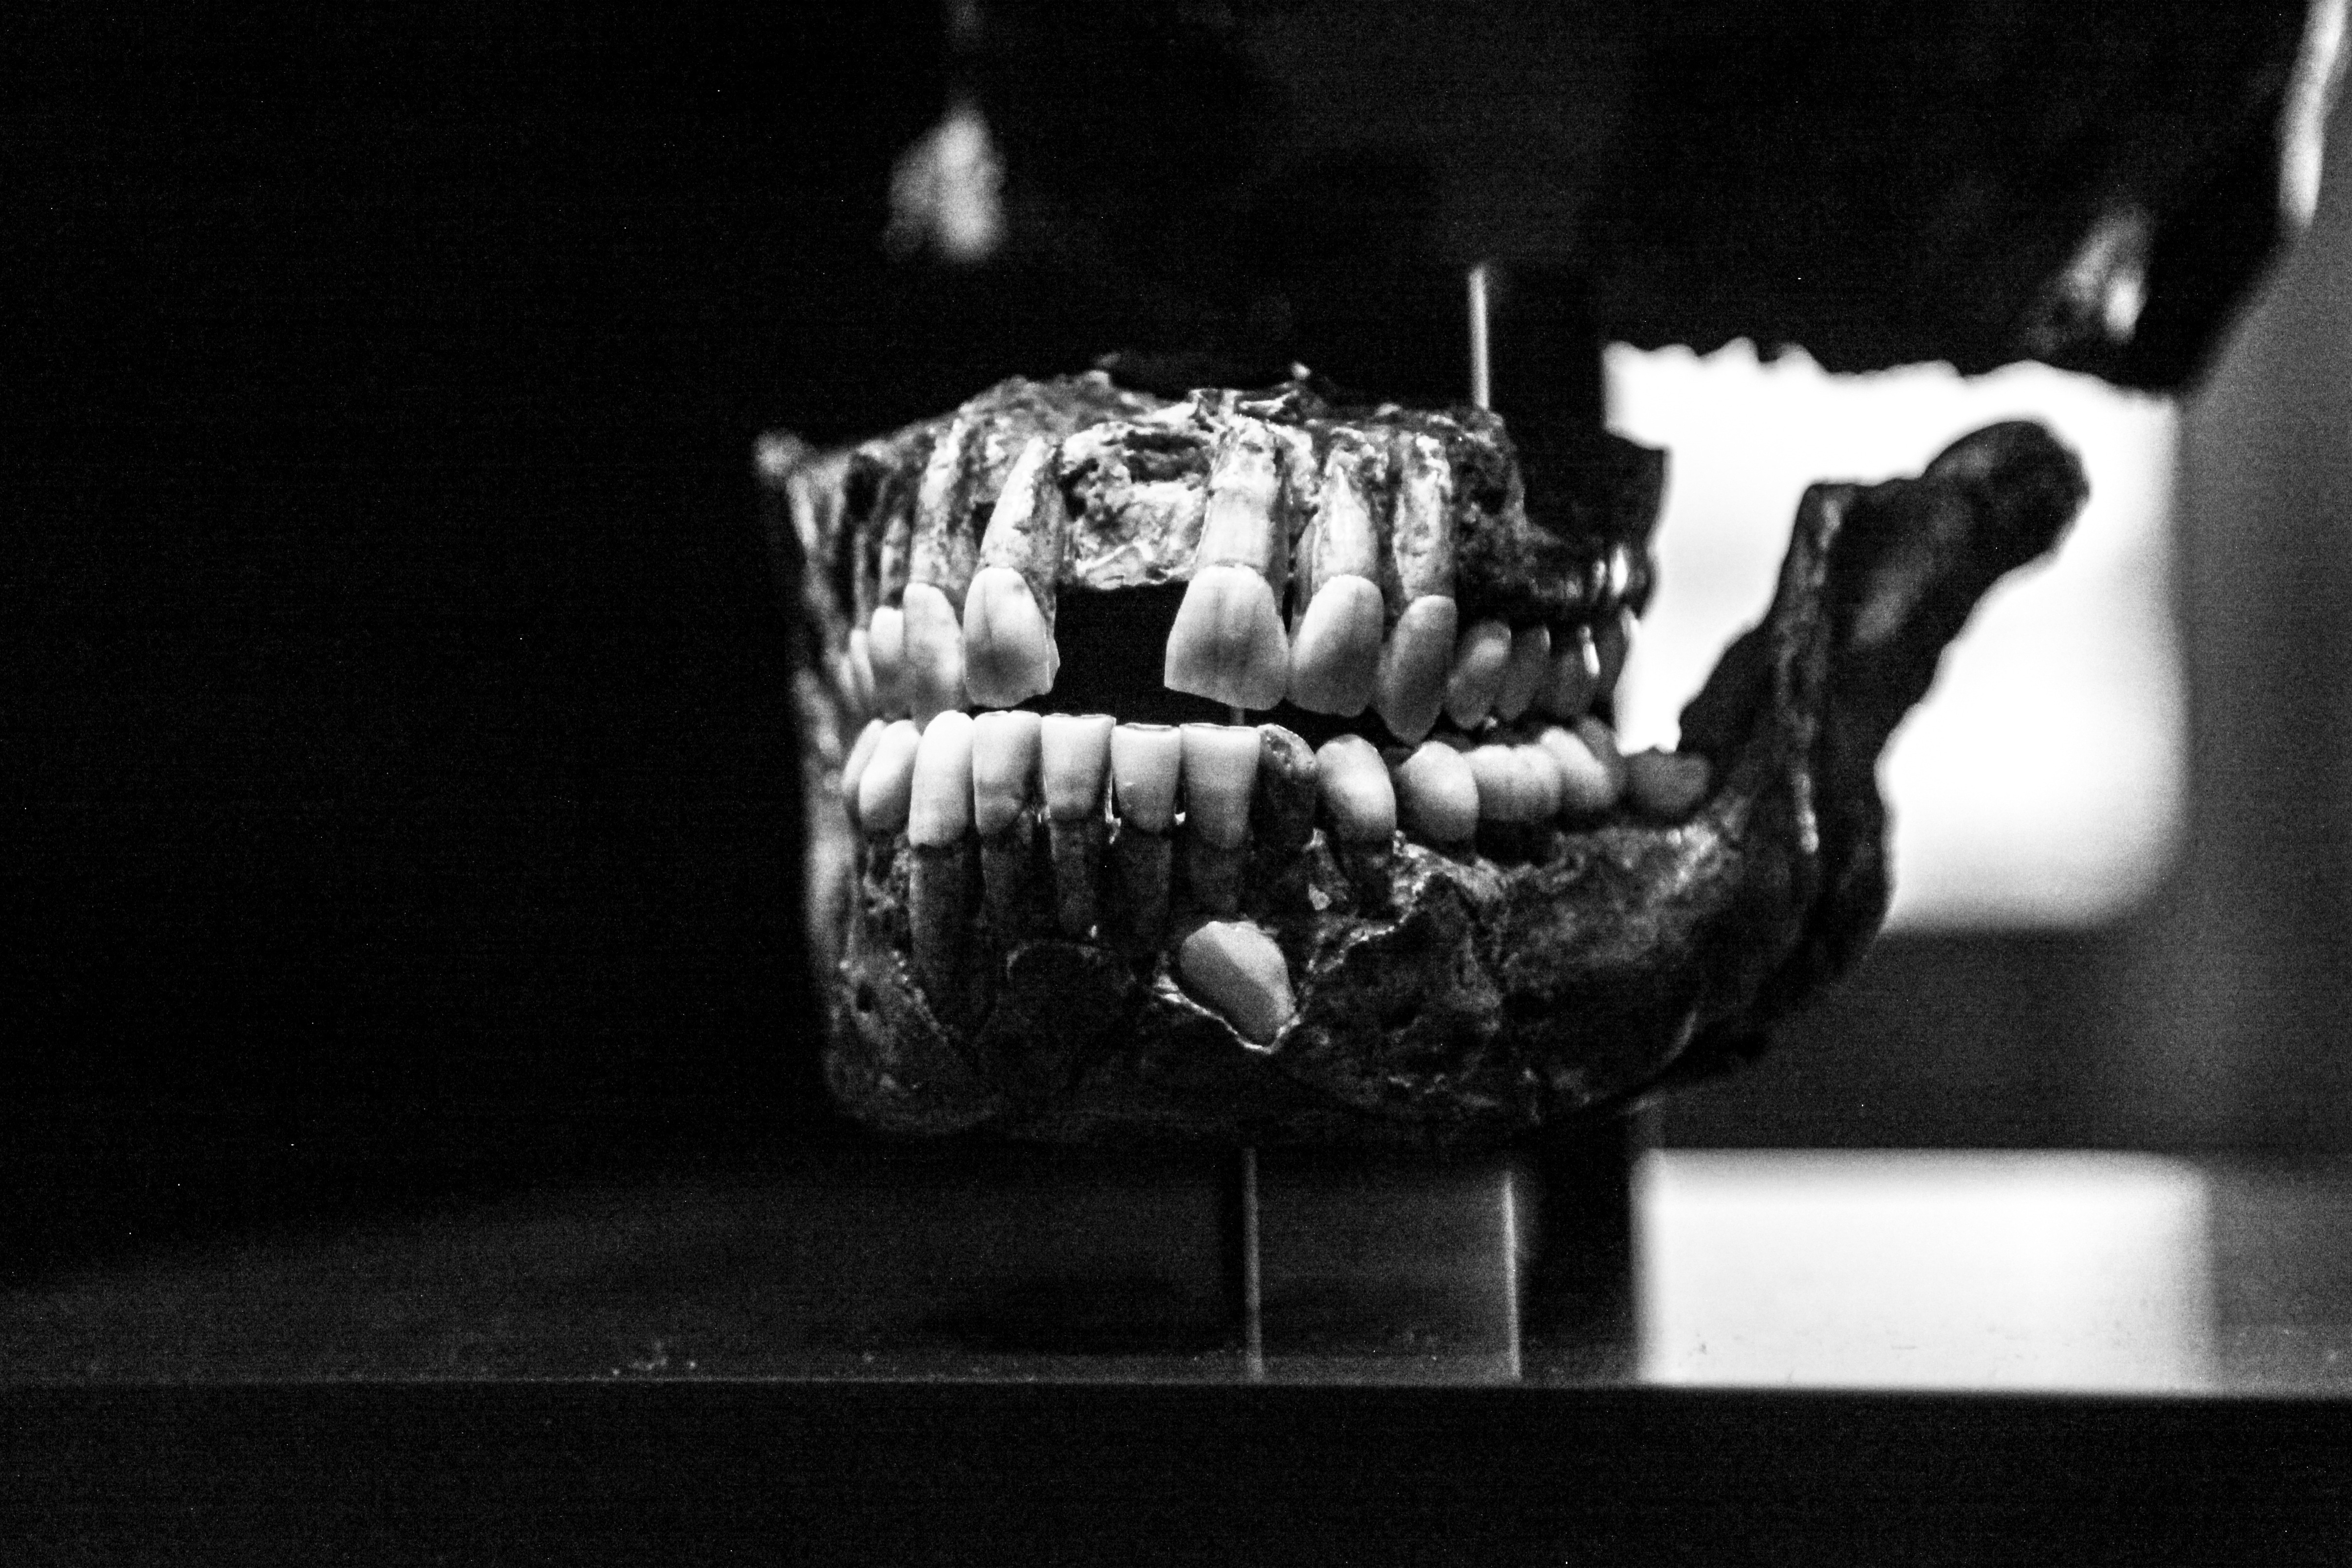 gray scale photo of dental dentures